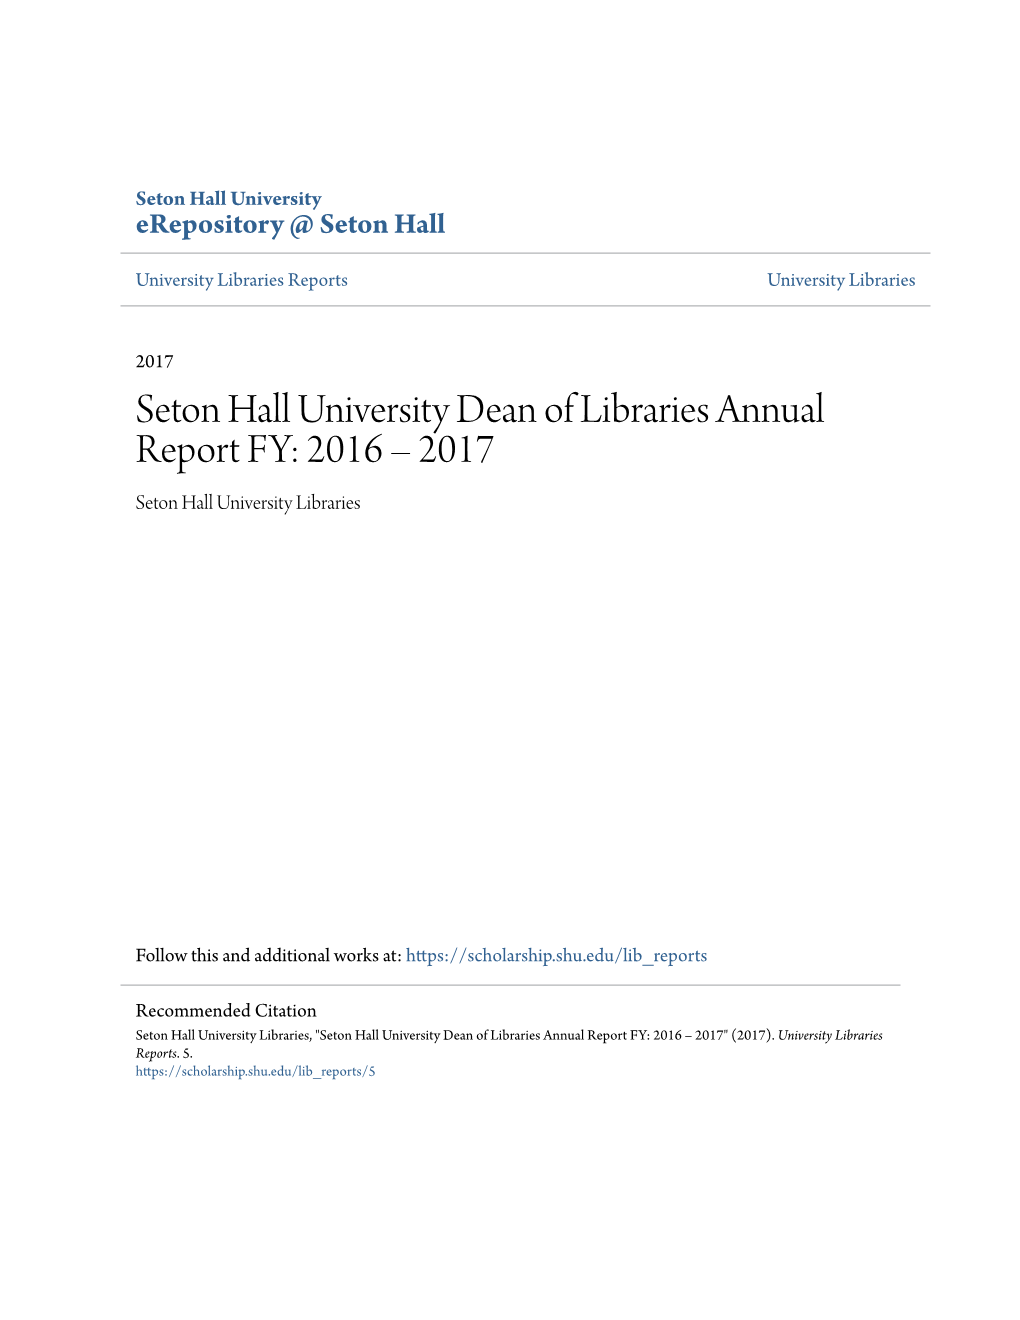 Seton Hall University Dean of Libraries Annual Report FY: 2016 Â